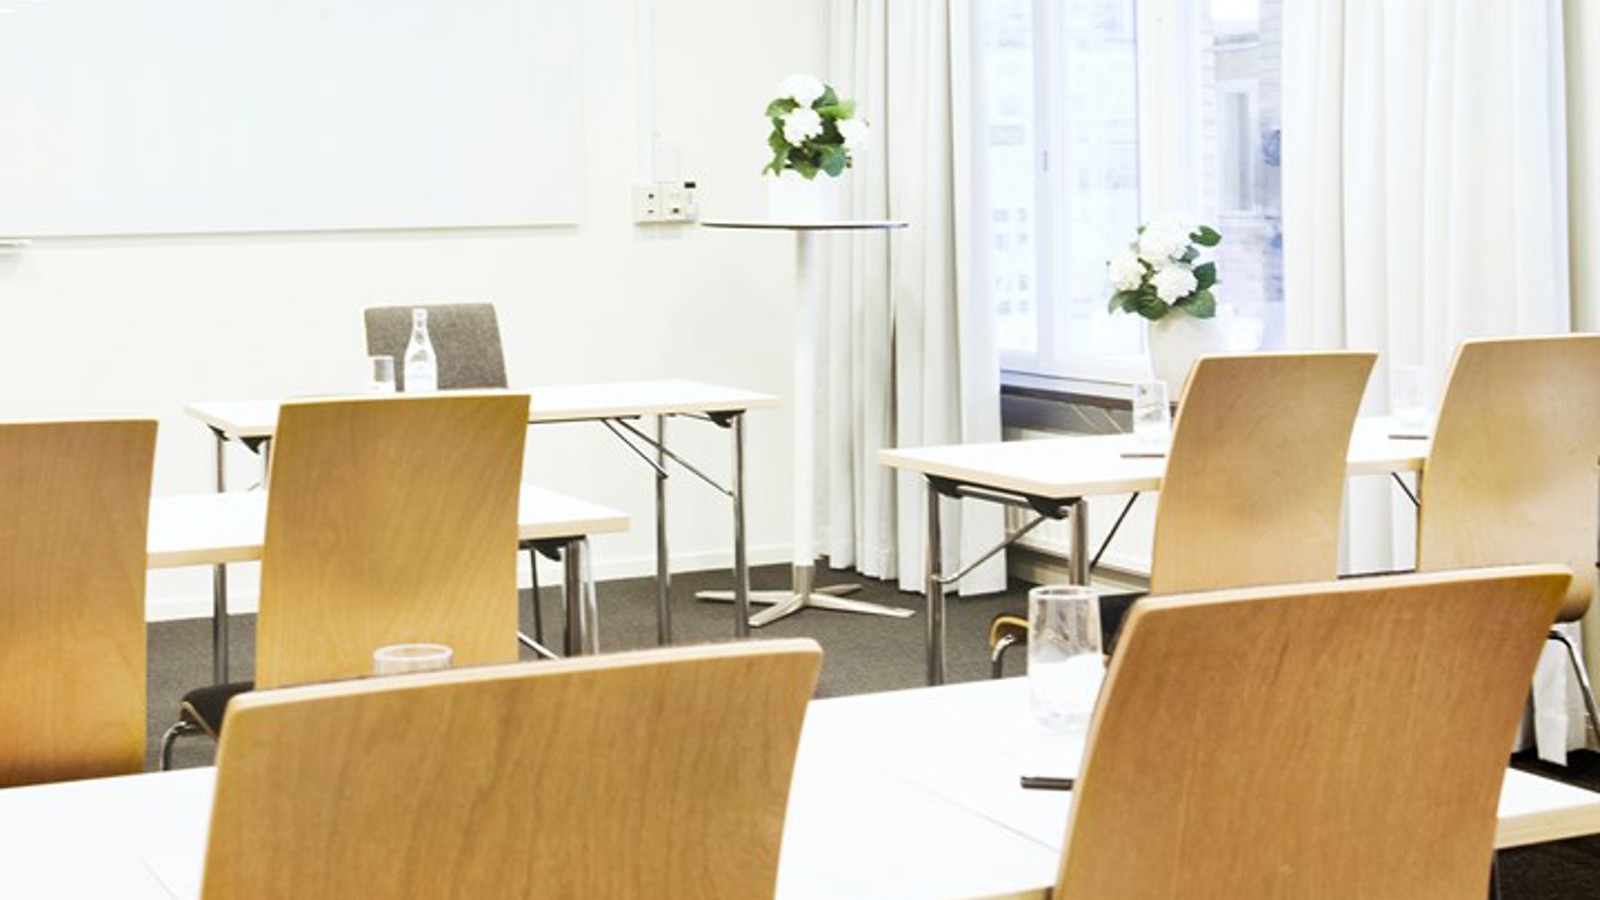 Conference room with school seating, wooden chairs and white walls